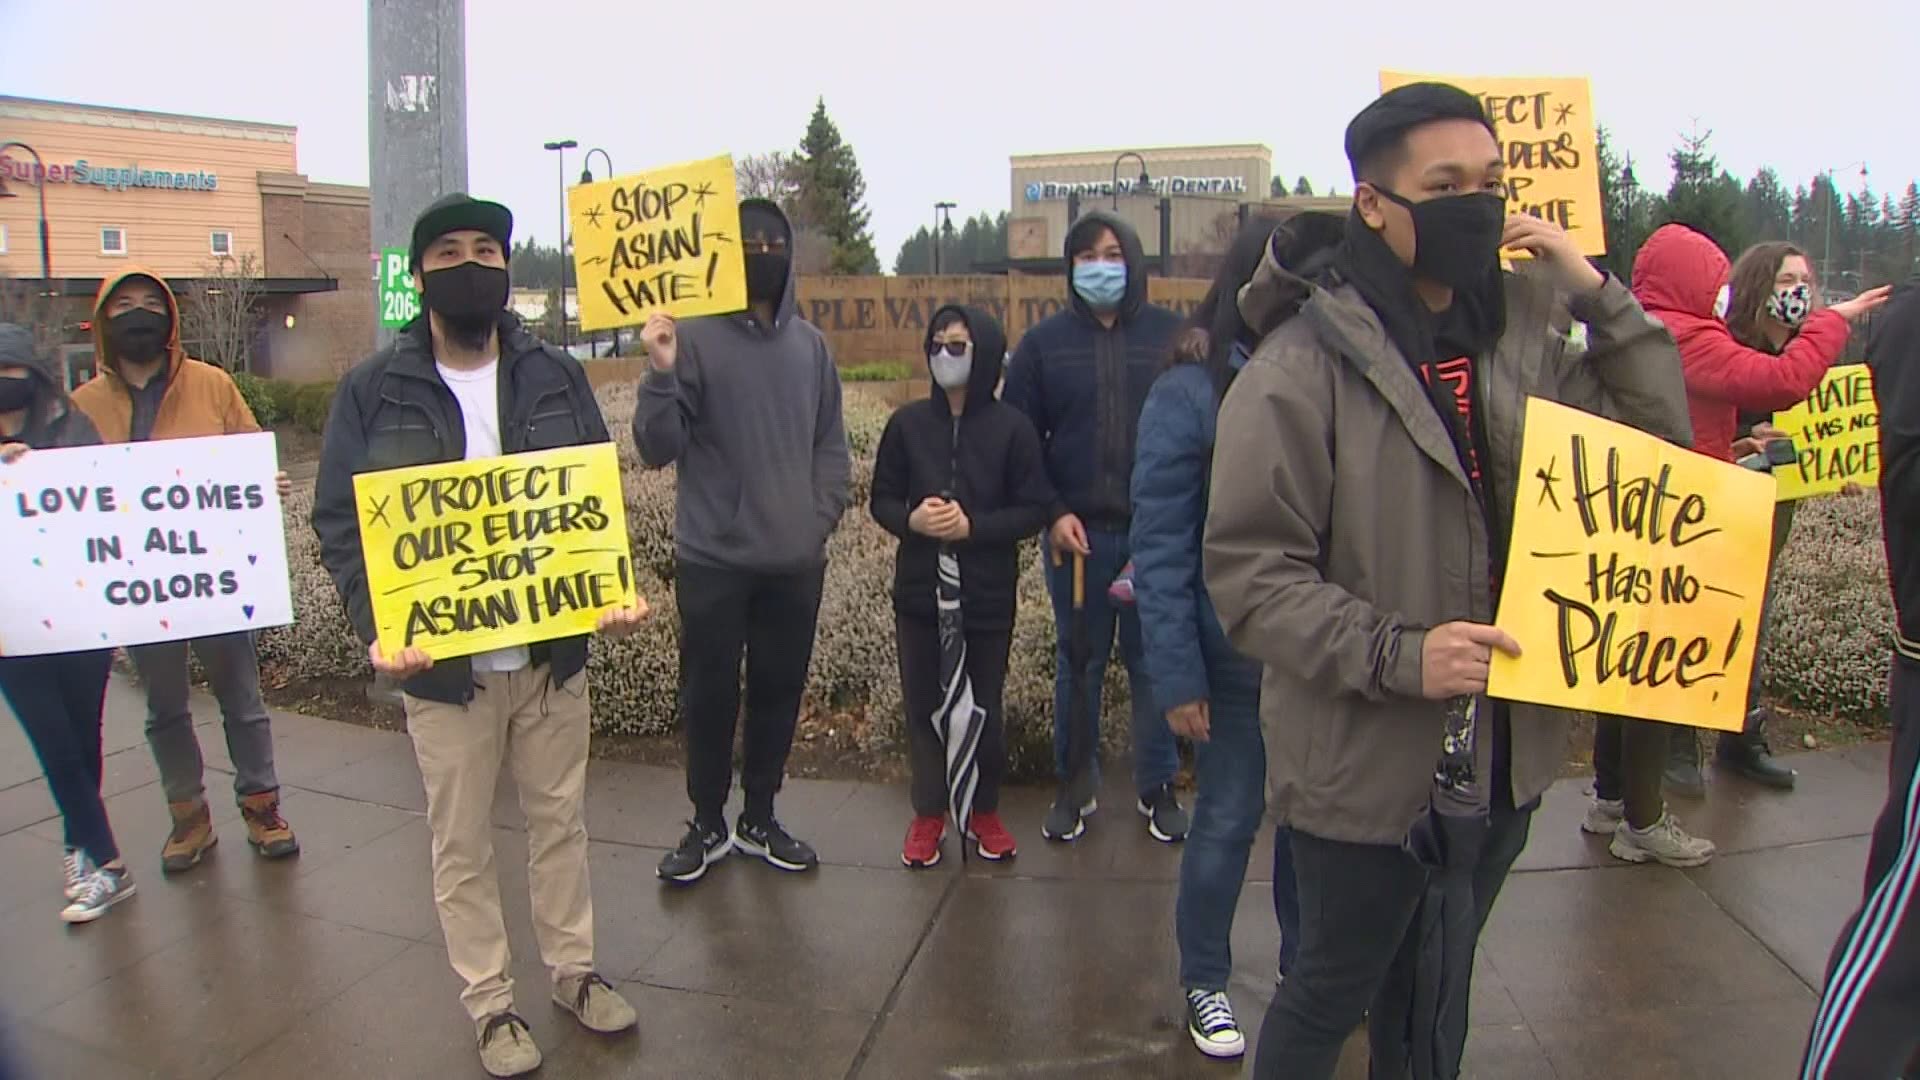 On Monday, a Seattle church was vandalized with anti-Asian words. People rallied through the weekend against a rise in hate crimes against people of Asian descent.